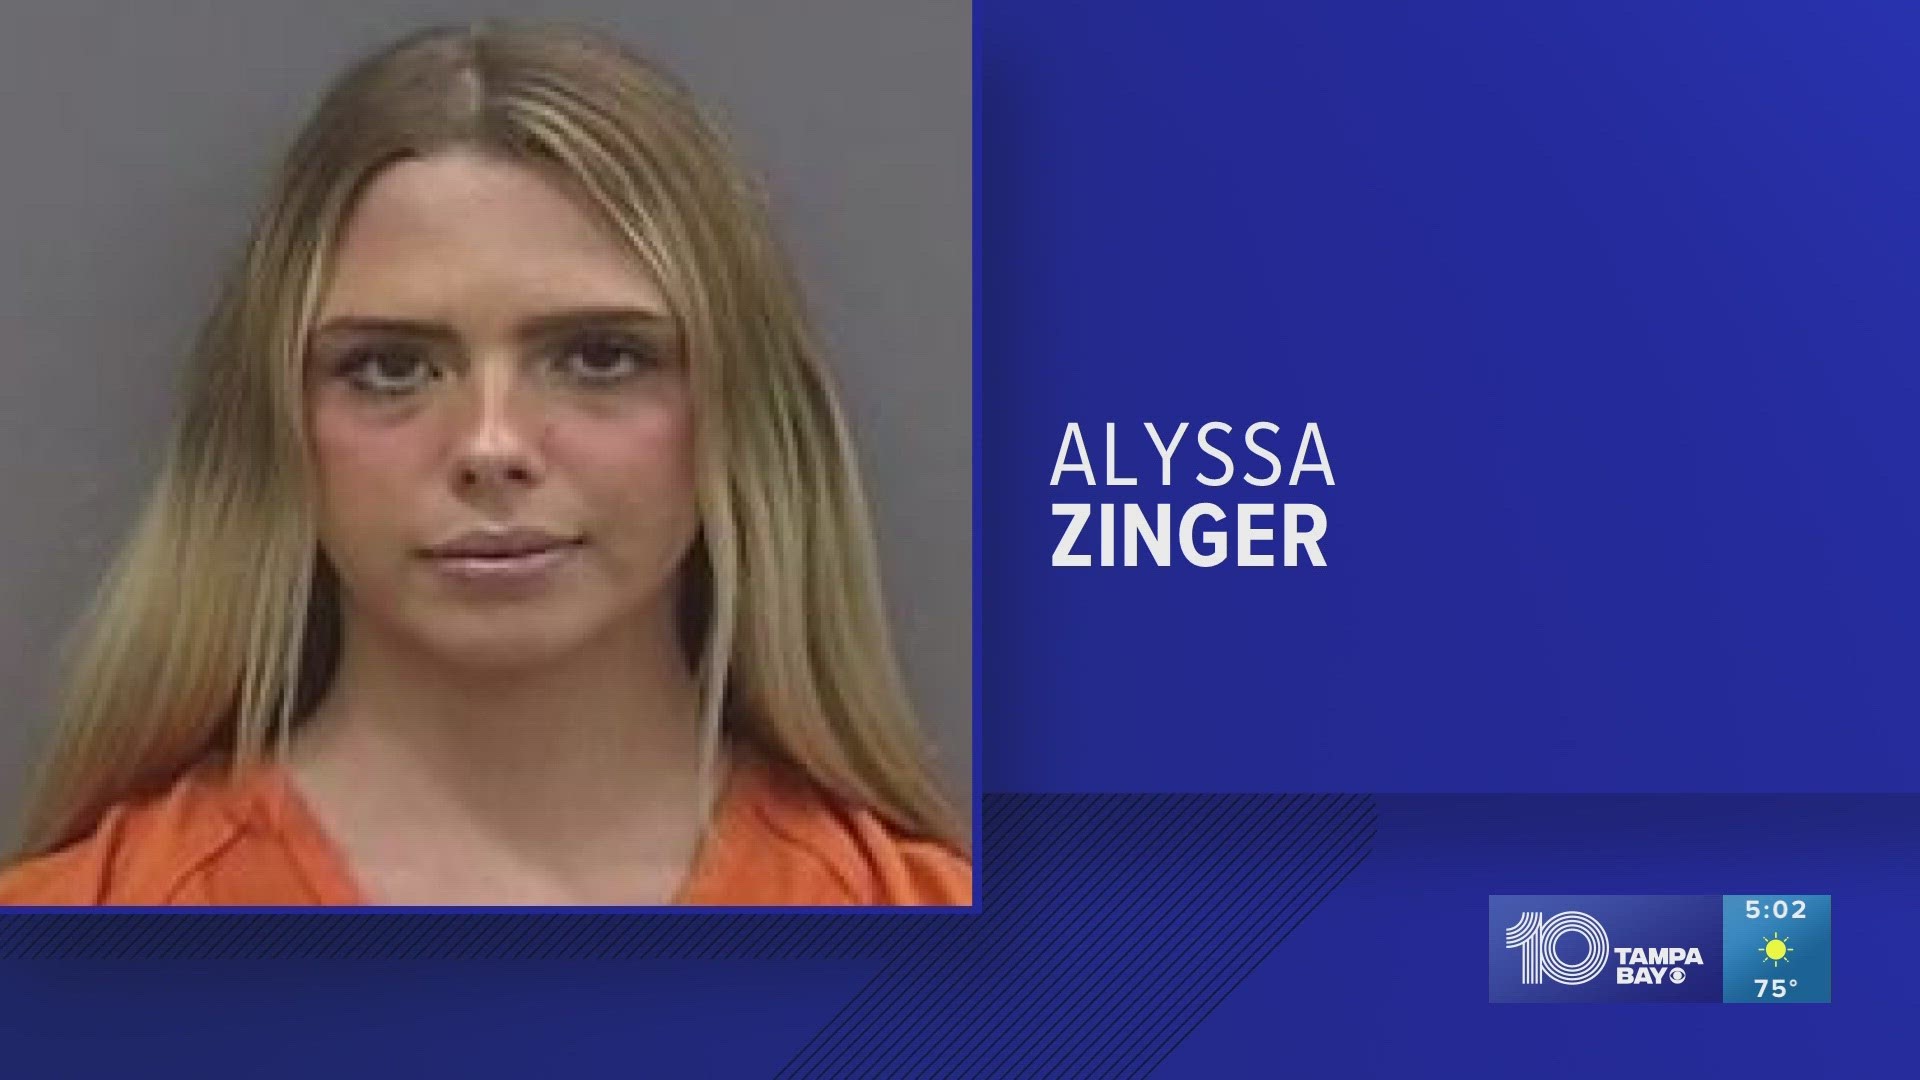 Alyssa Zinger has been charged with 11 felonies and faces up to 146 years in prison if convicted.